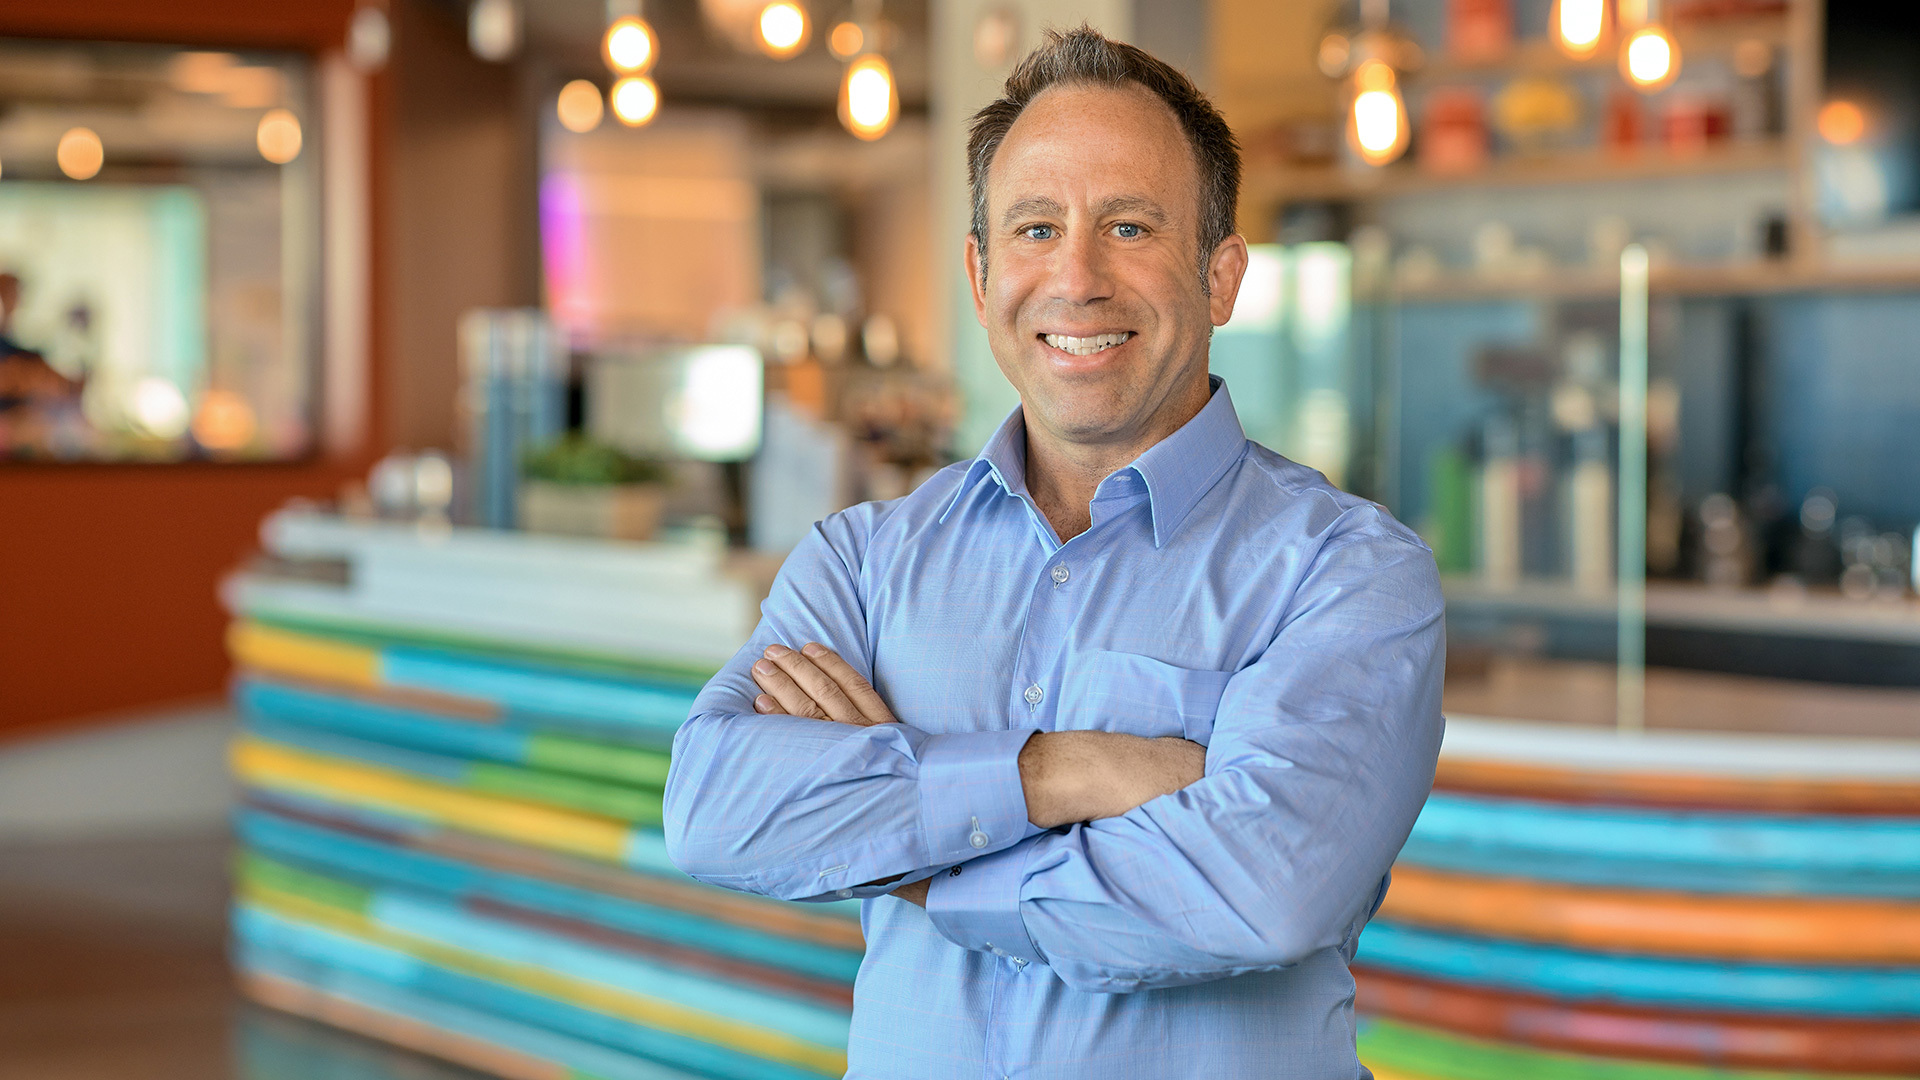 Dan Roth stands with arms folded in front of a counter with a colorful, striped pattern